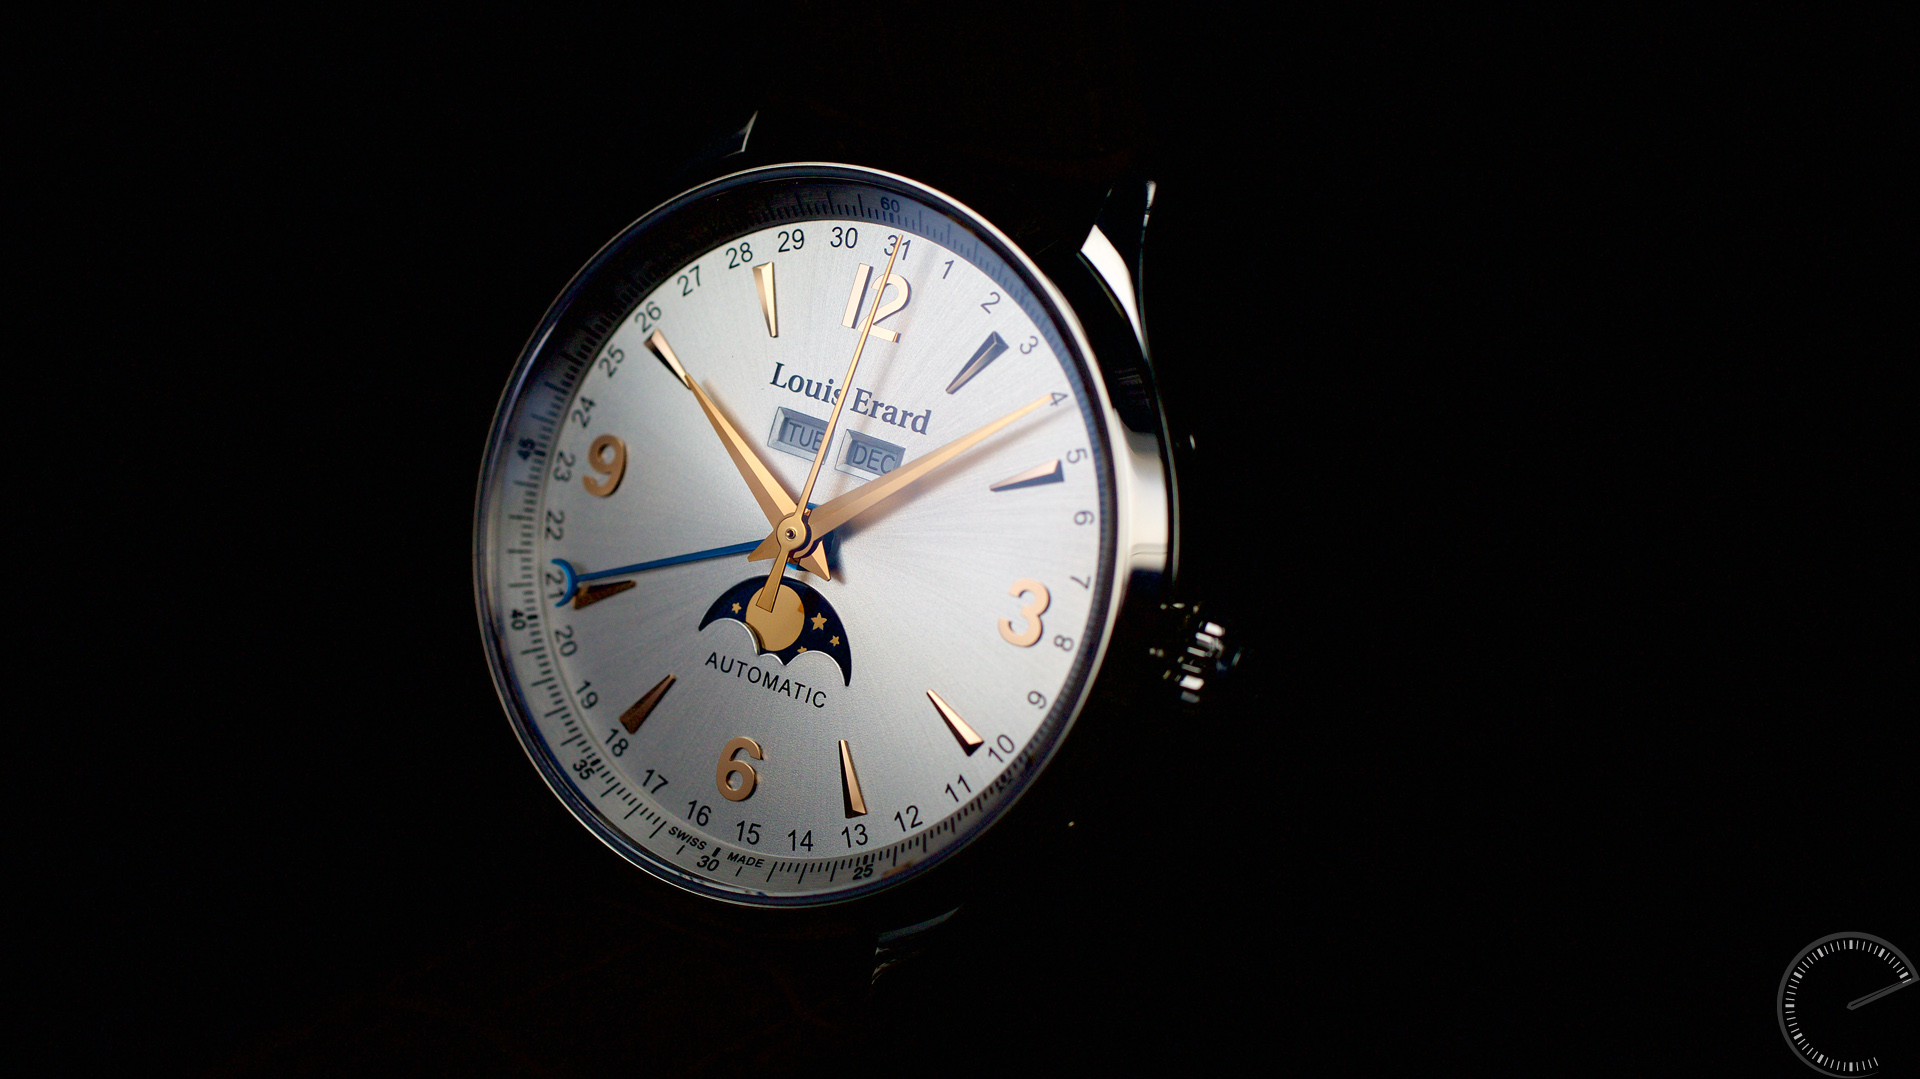 Louis Erard 1931 Moonphase - ESCAPEMENT - watch replica review magazine by Angus Davies